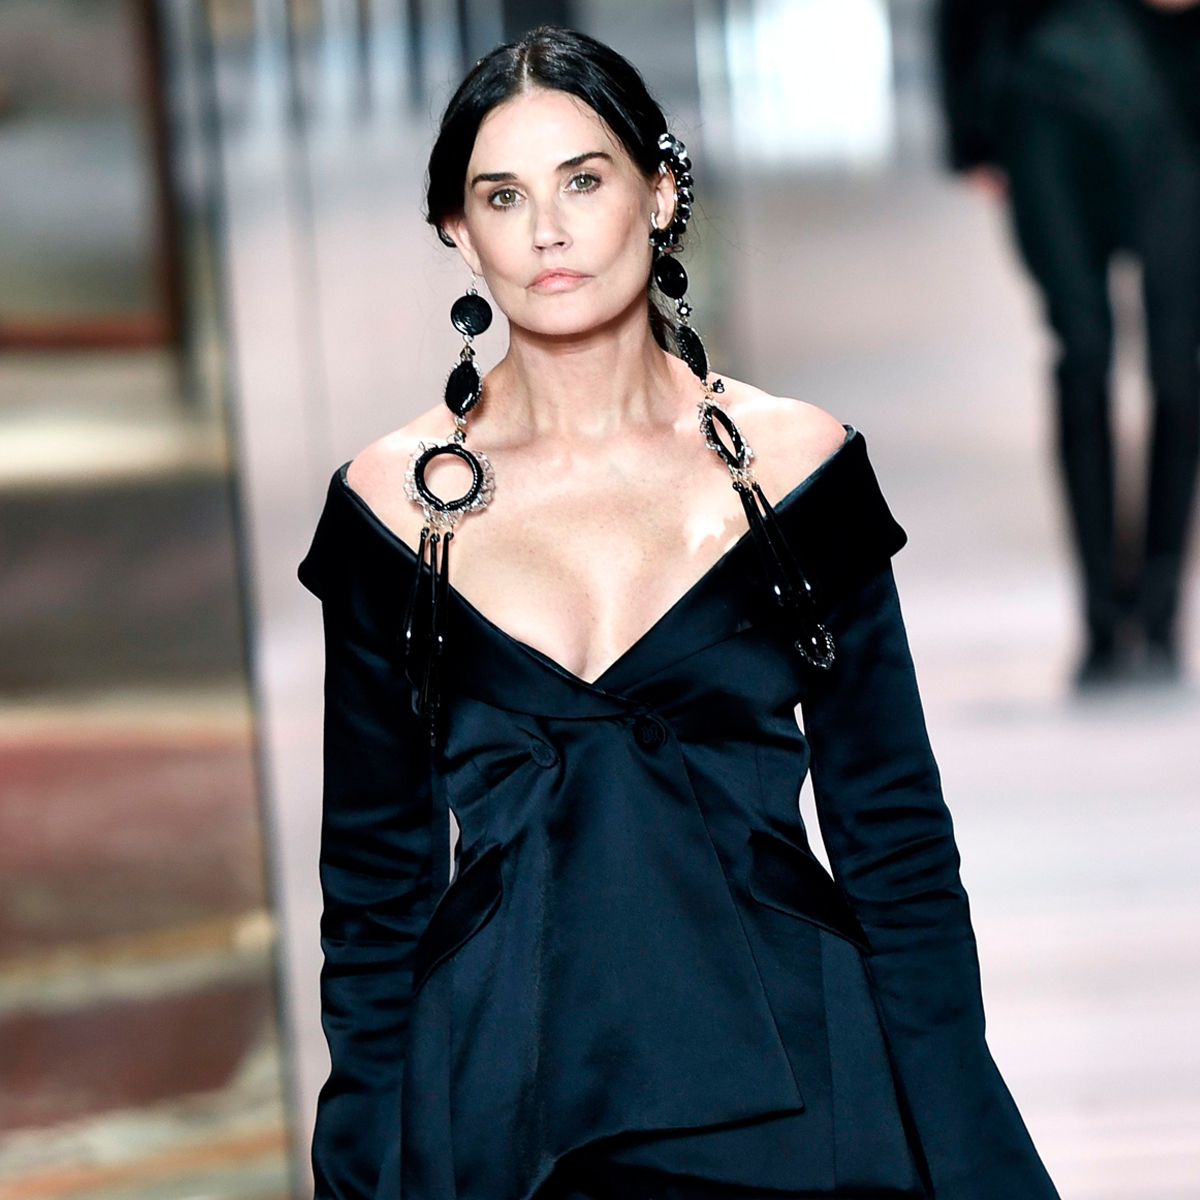 Fendi spring / summer 2021 couture: Demi Moore, Bella Hadid and Kate Moss  bring star power to Paris catwalk